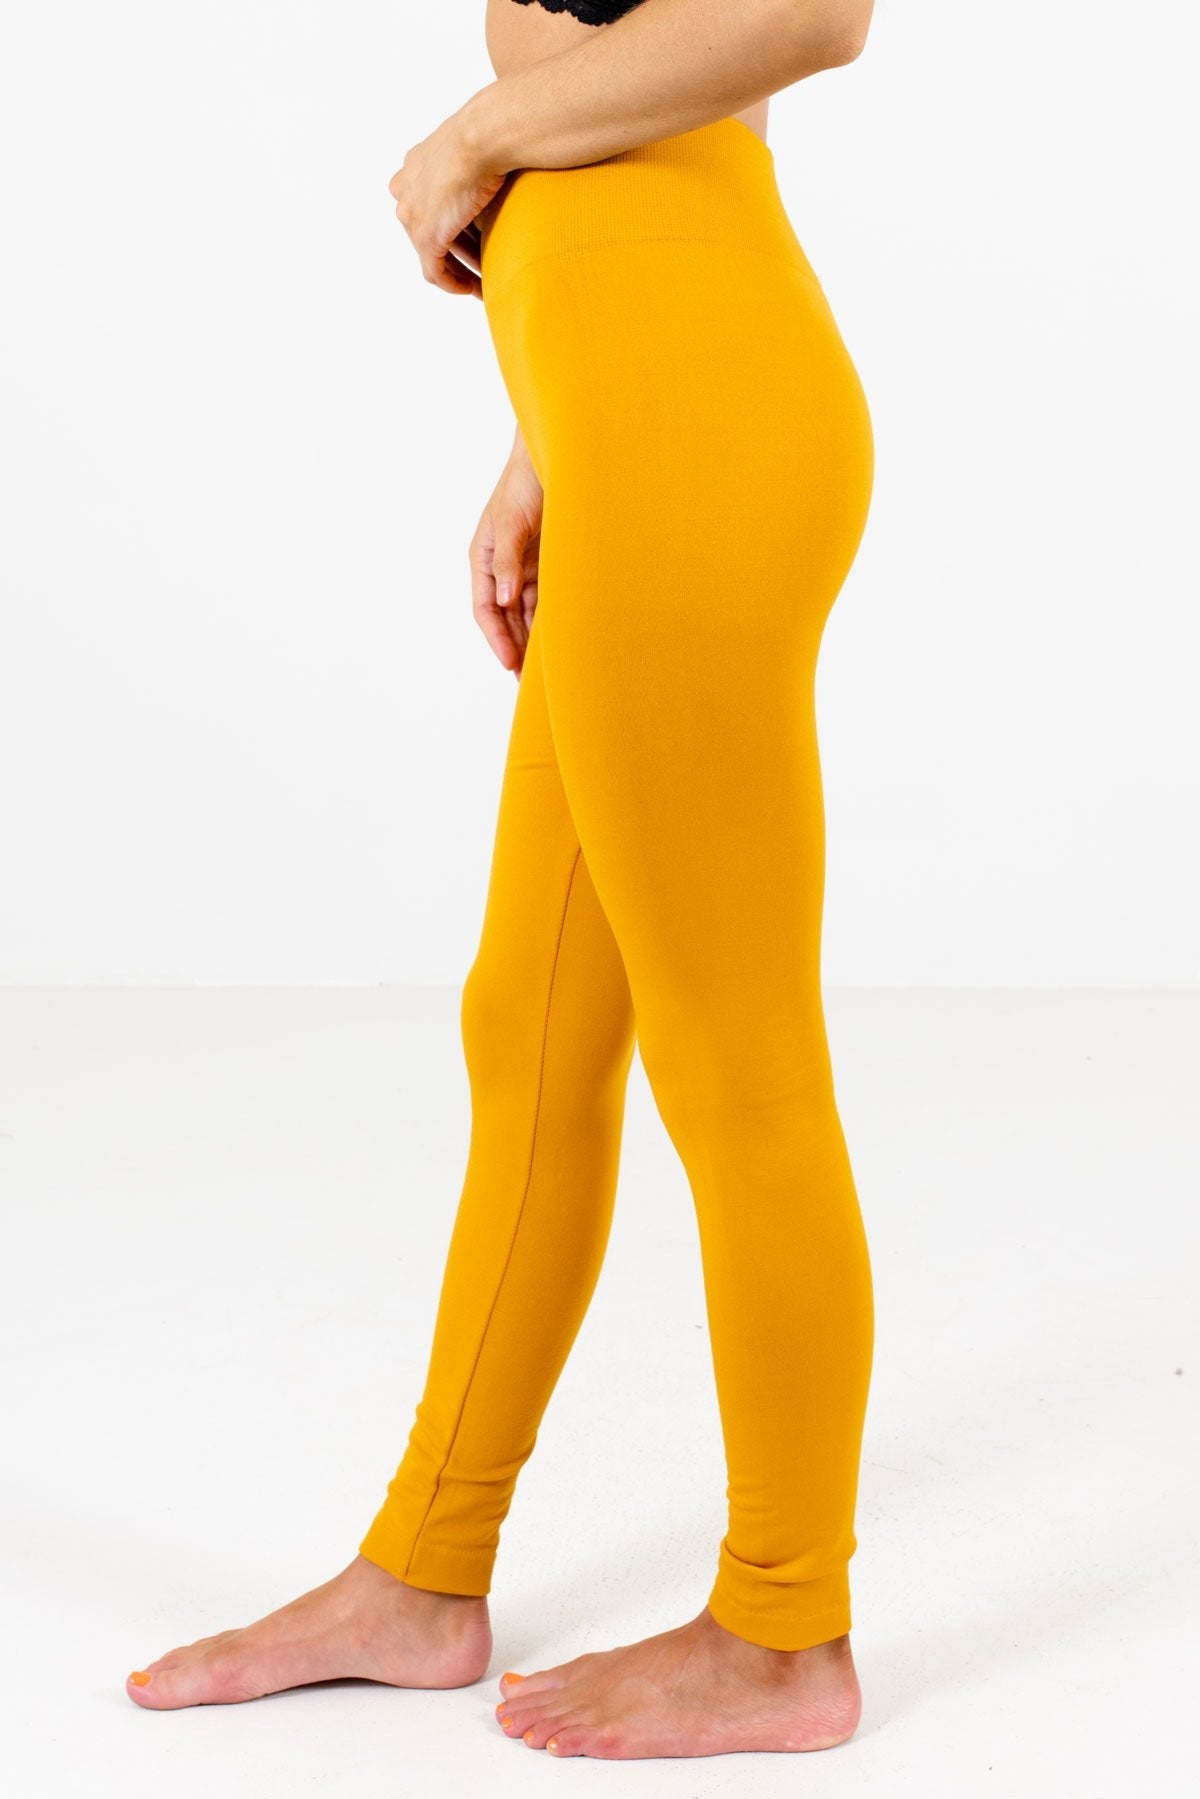 Mustard Yellow Skinny Fit Boutique Leggings for Women